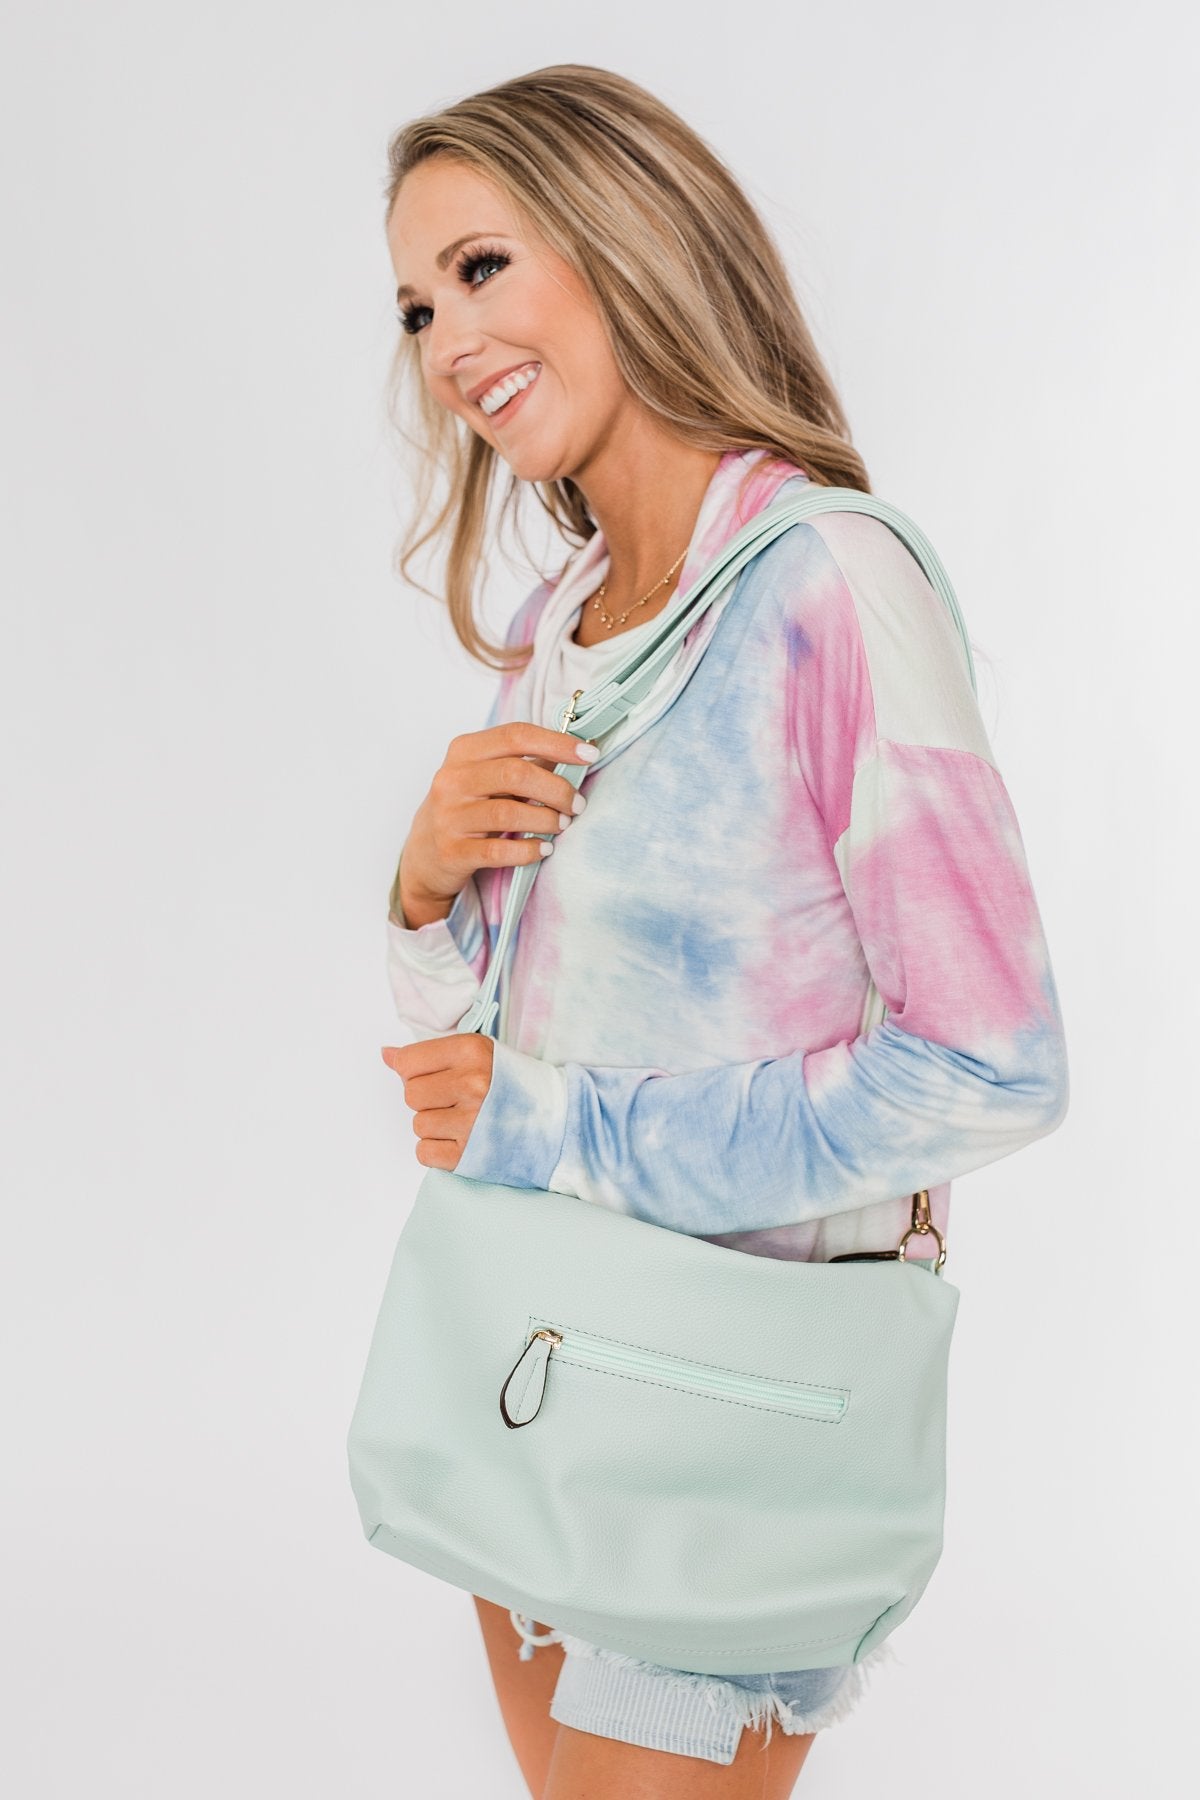 Bring on the Day Zipper Purse- Mint